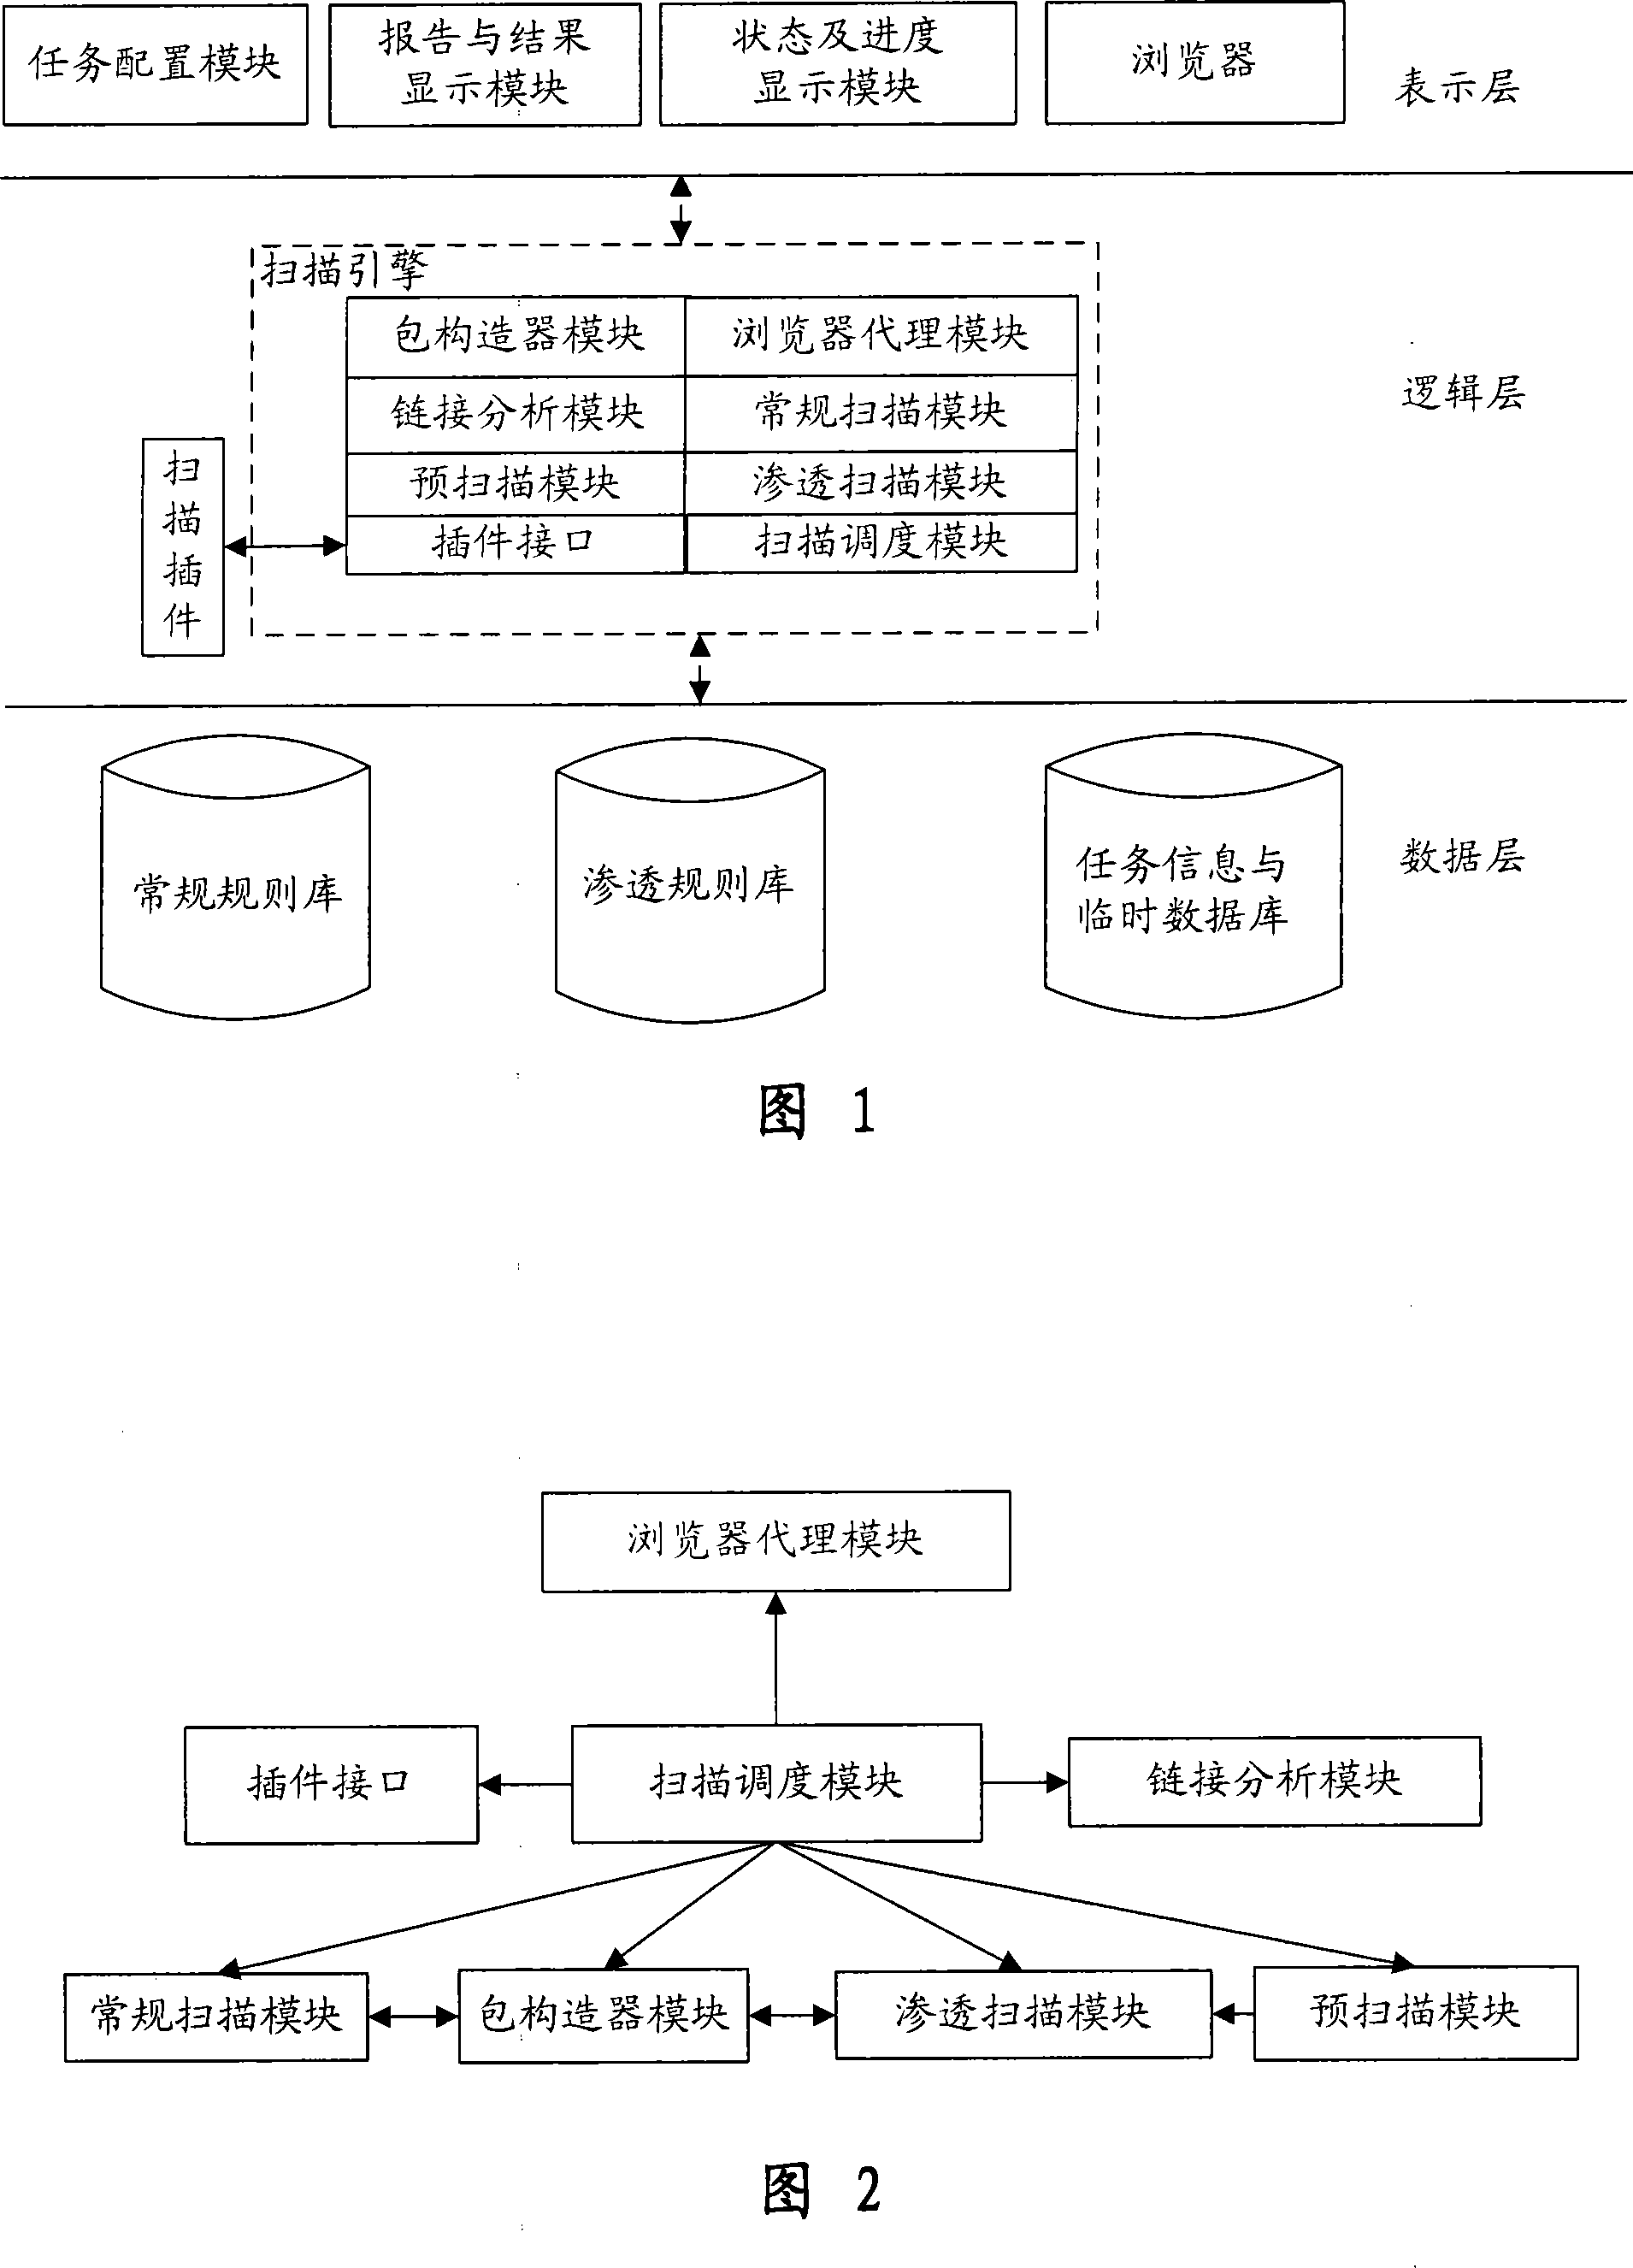 Automatic penetration testing system and method for WEB system